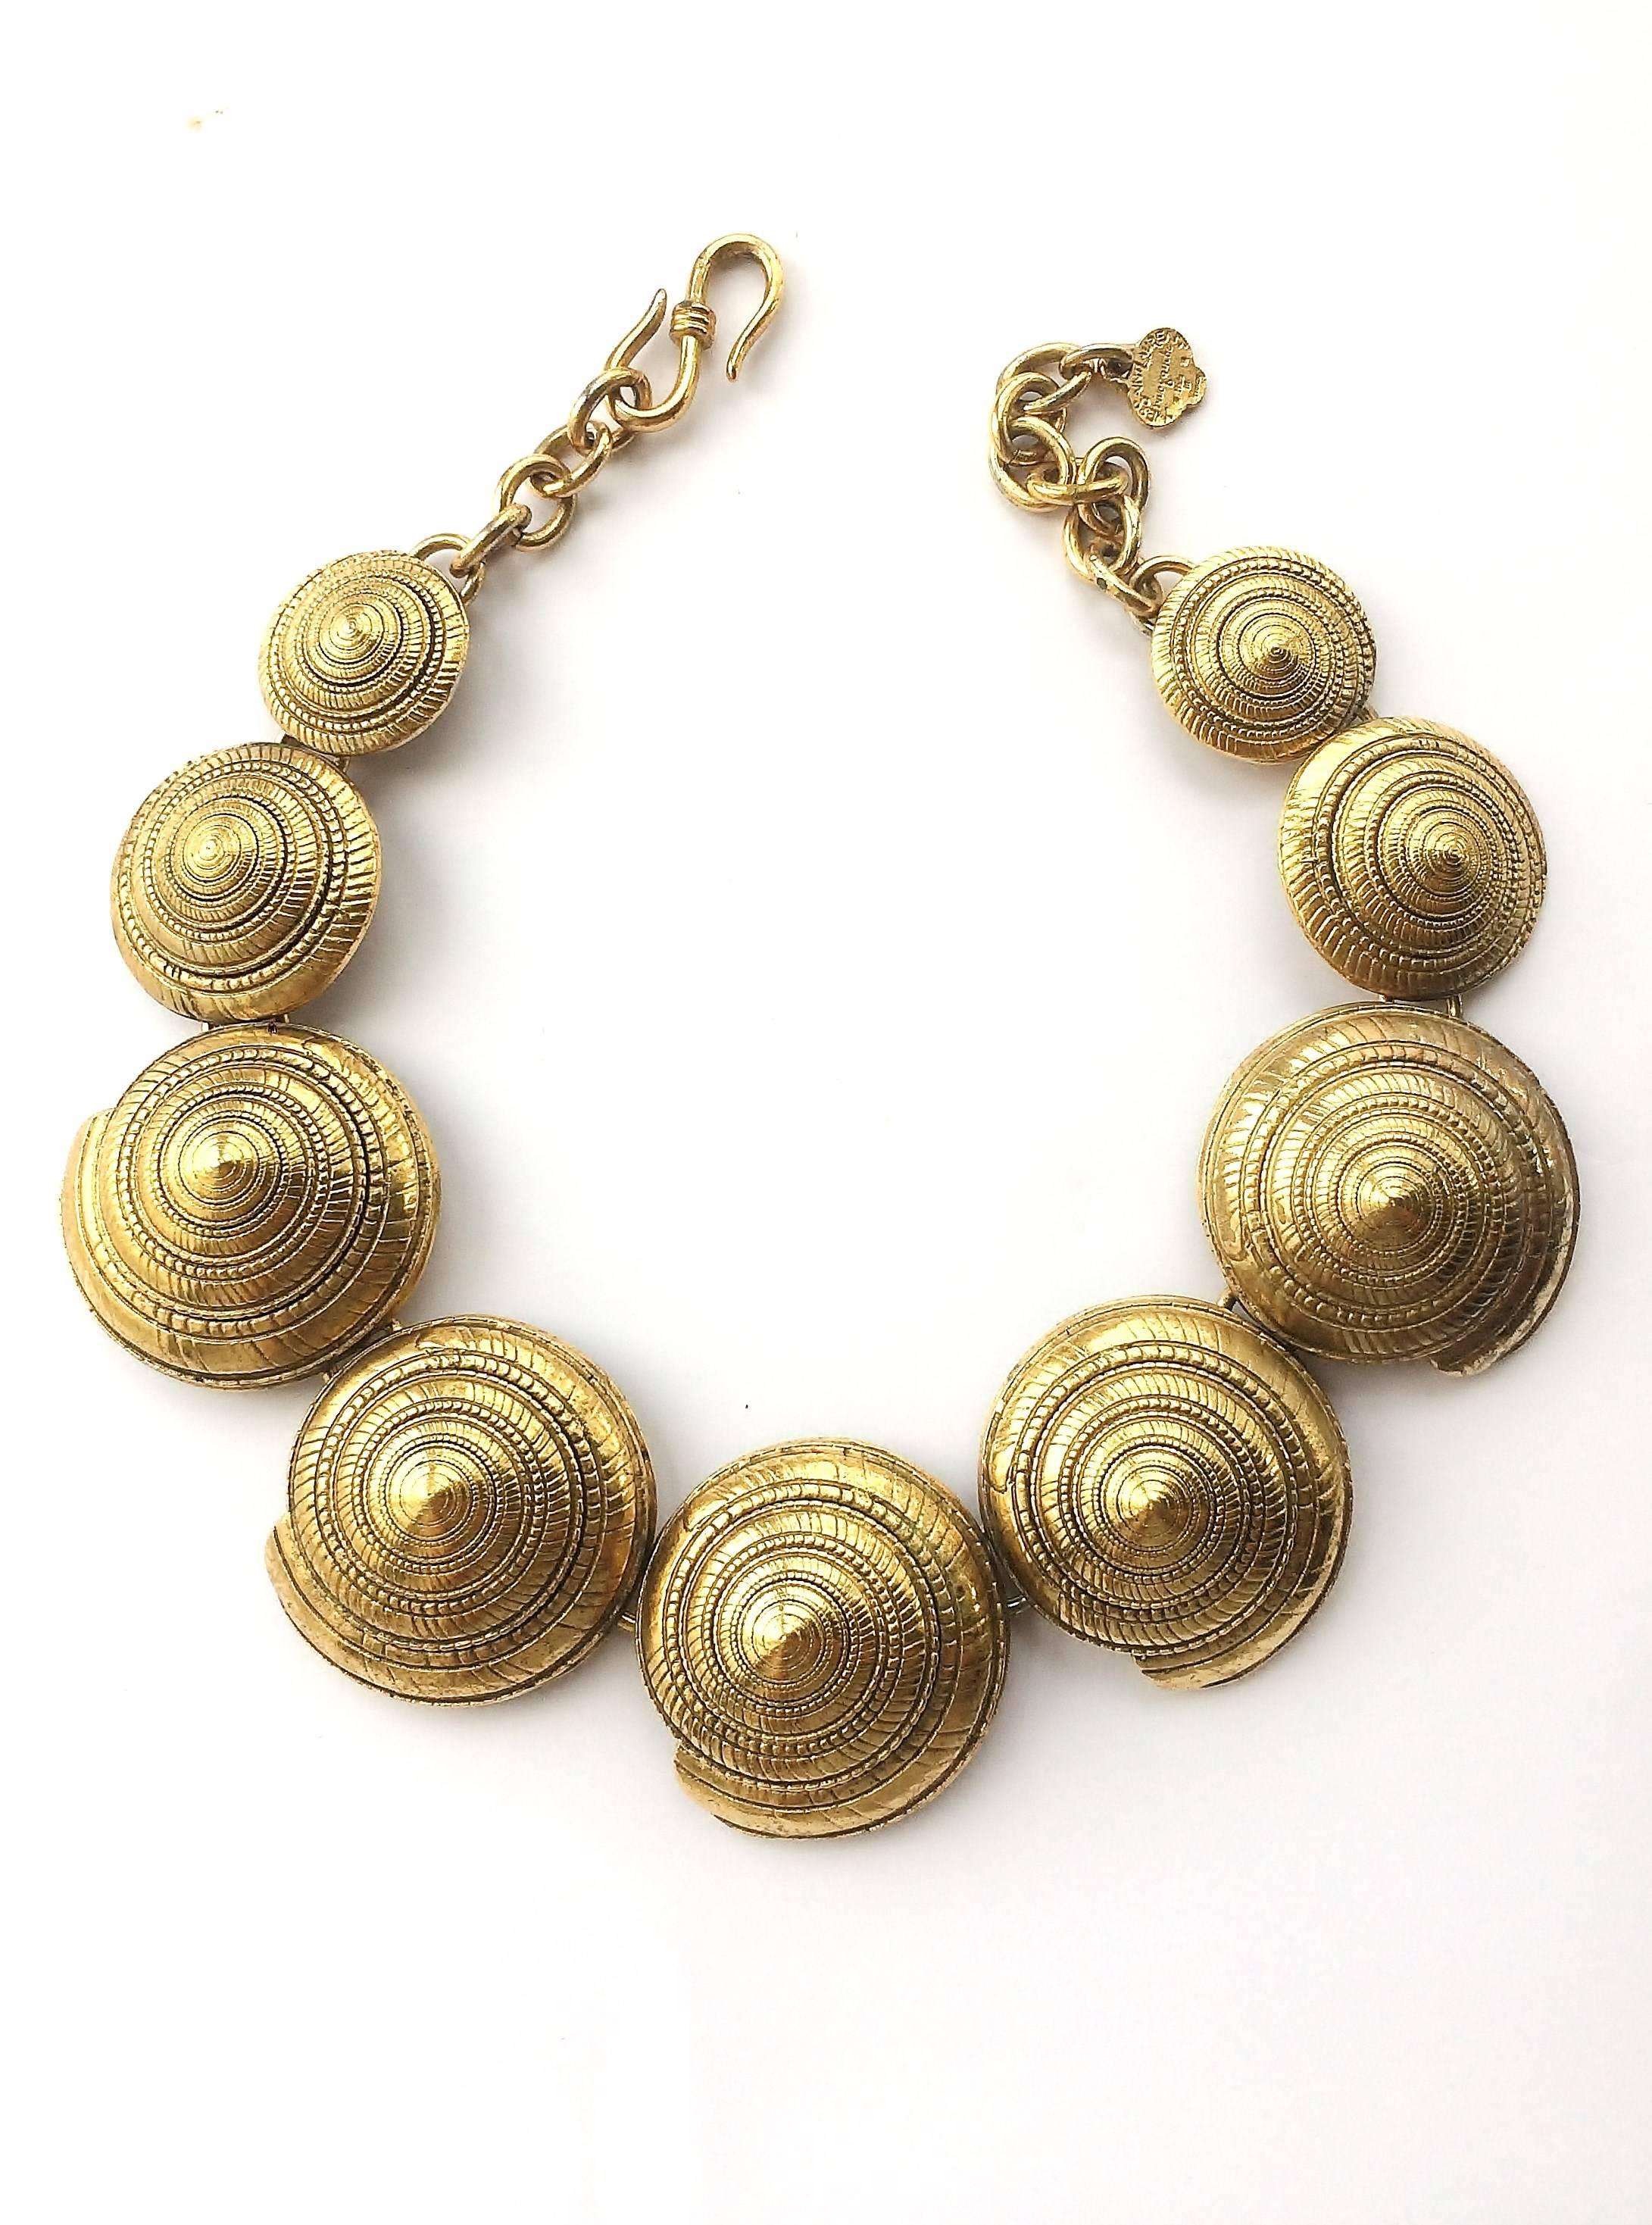 A wonderful, striking gilt metal necklace by YSL, from the mid 1980s - each 'shell' beautifully sculpted and detailed, finished off in an exquisitely burnished antique gilt. Immediately eye catching and a perfect example of the strength of design